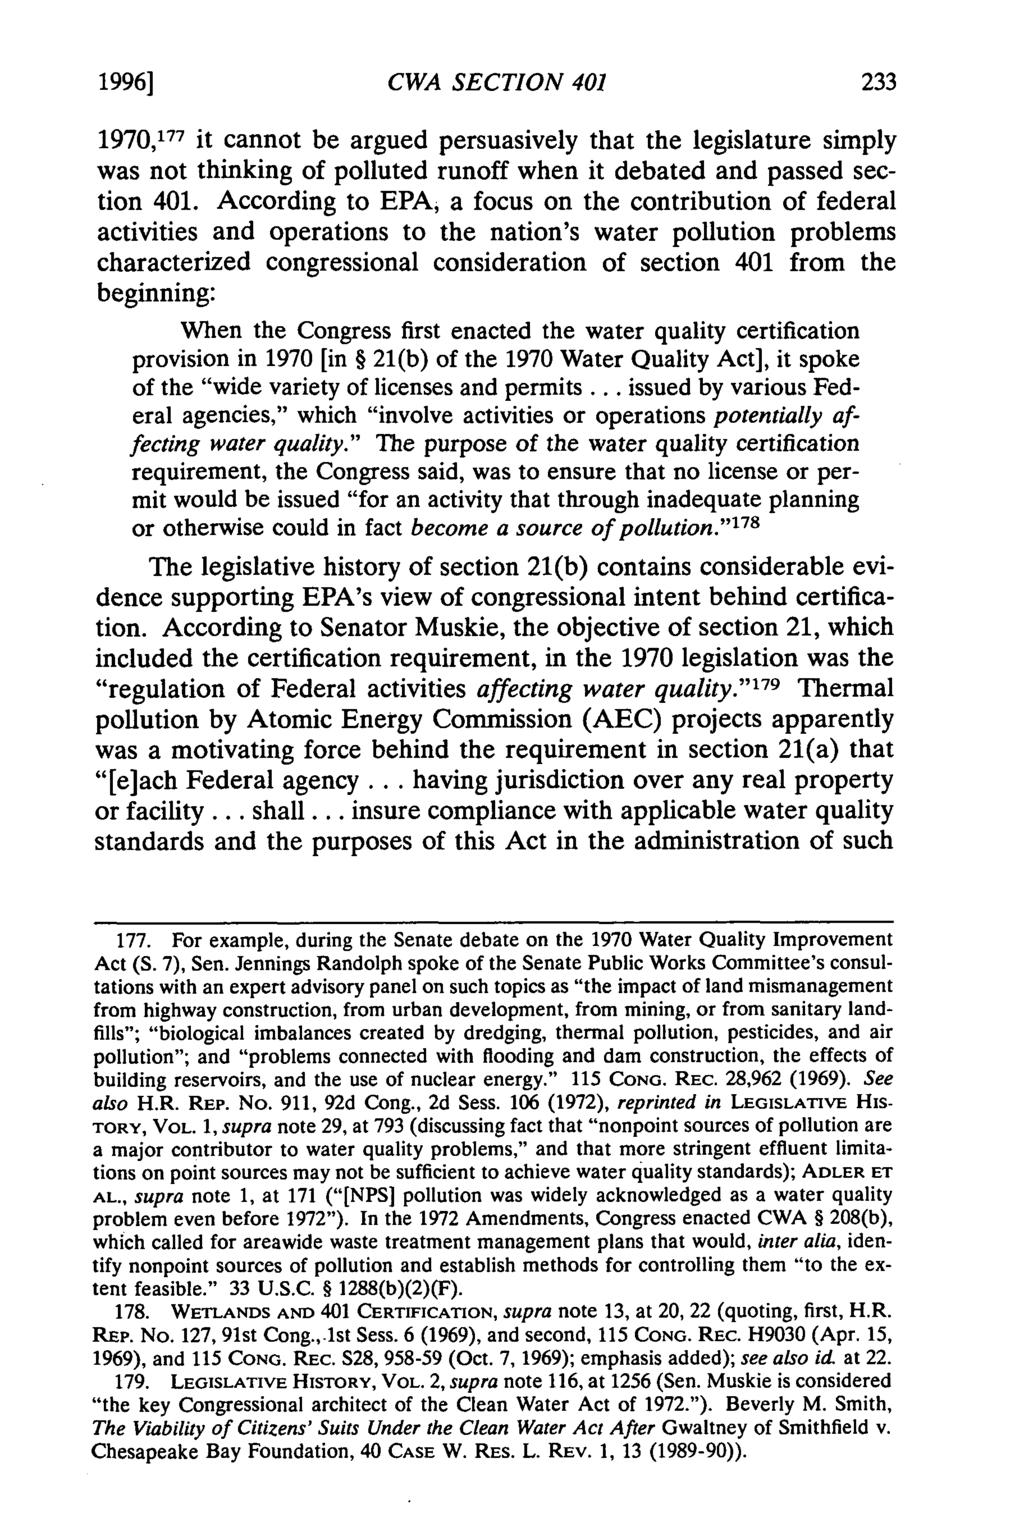 1996] CWA SECTION 401 1970,177 it cannot be argued persuasively that the legislature simply was not thinking of polluted runoff when it debated and passed section 401.